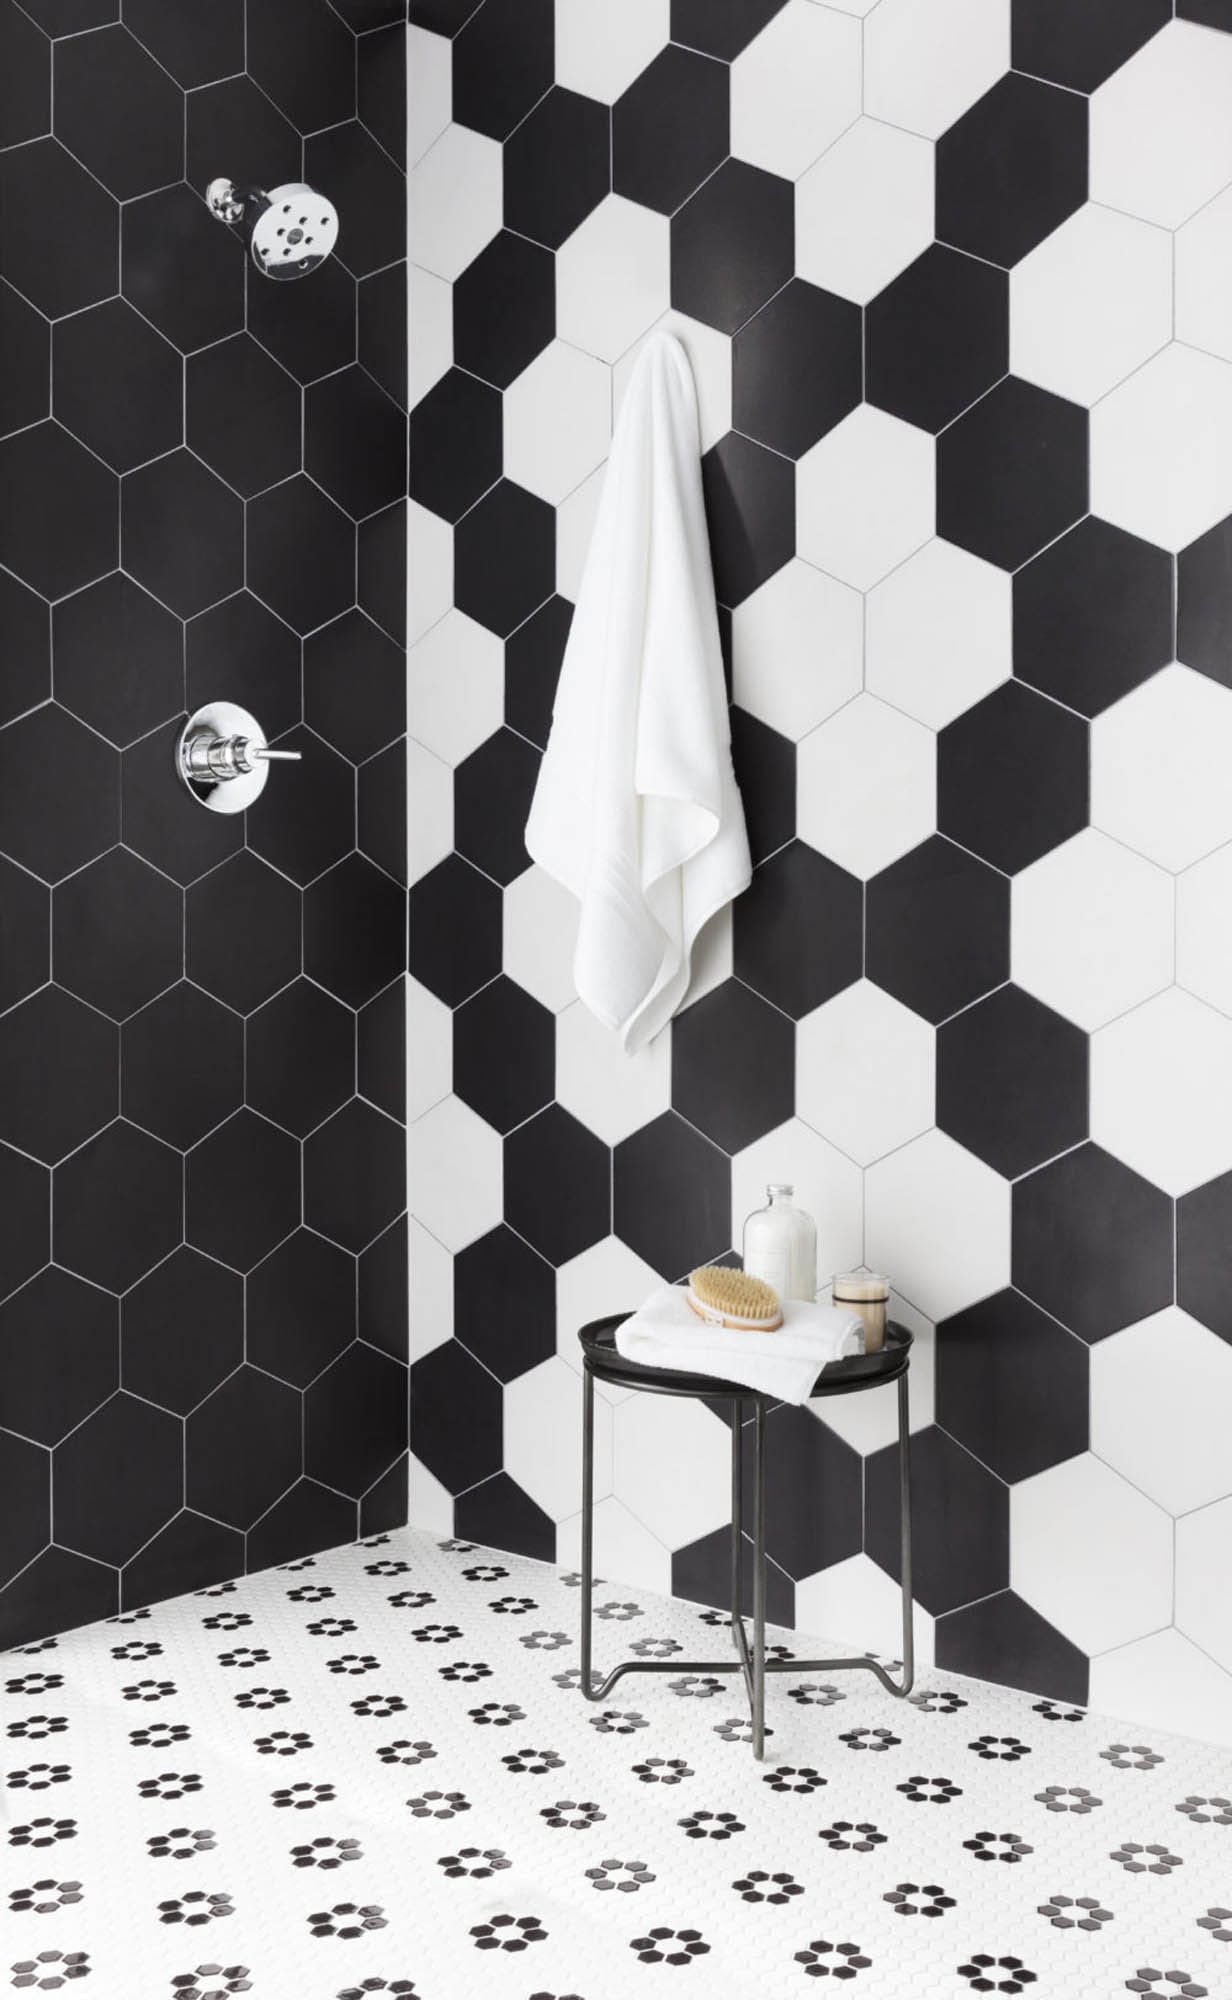 Designing With Black And White Tile The Tile Shop Blog